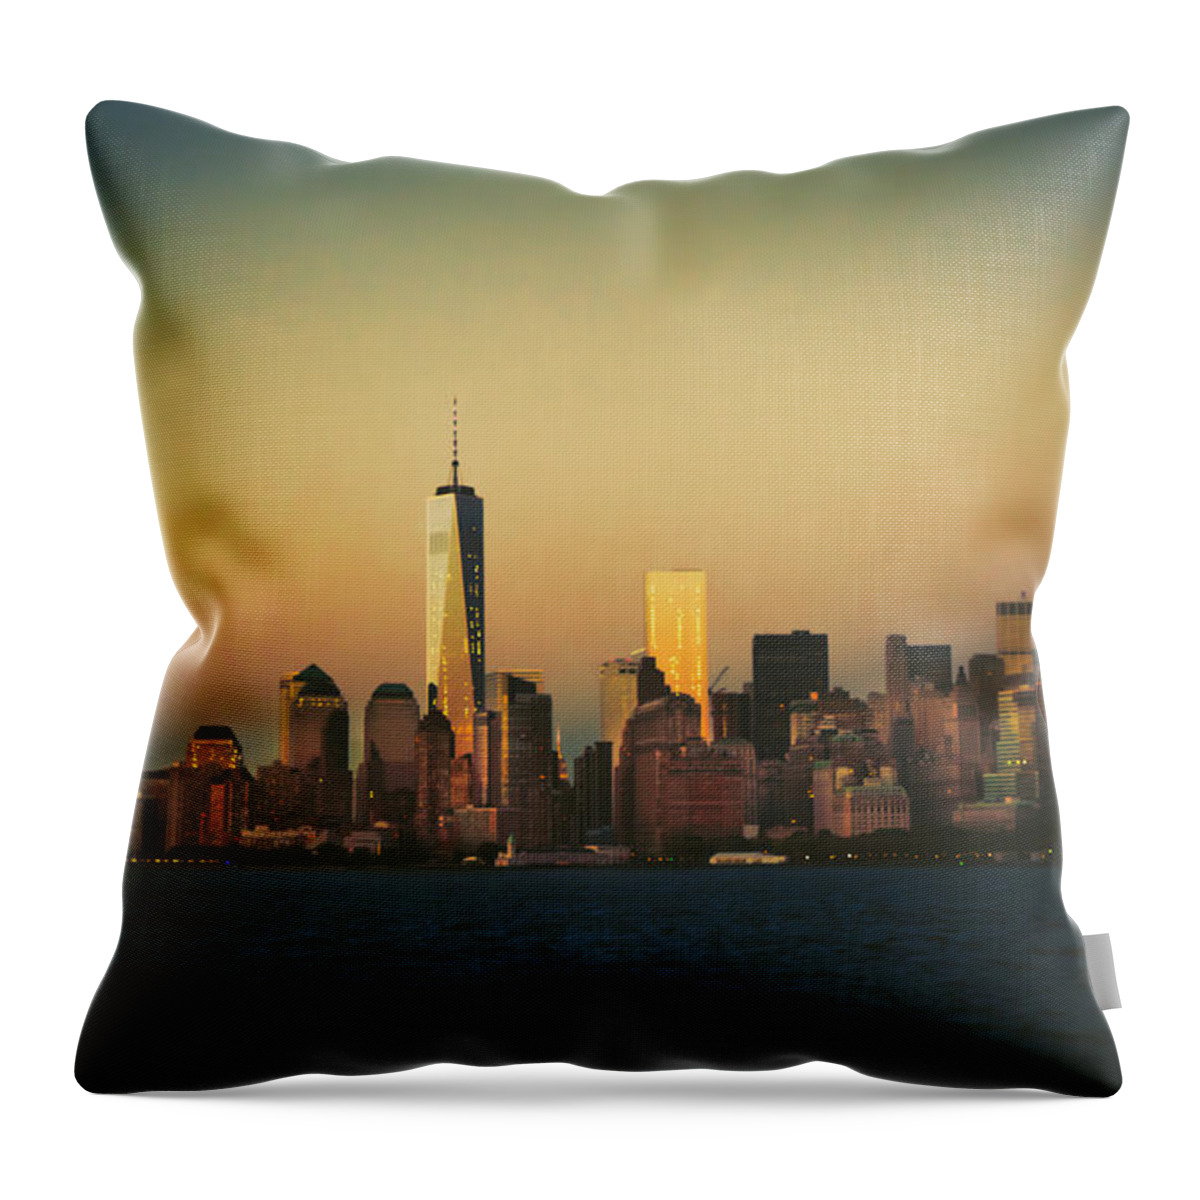 Nyc Throw Pillow featuring the photograph New York City Skyline #3 by Vivienne Gucwa